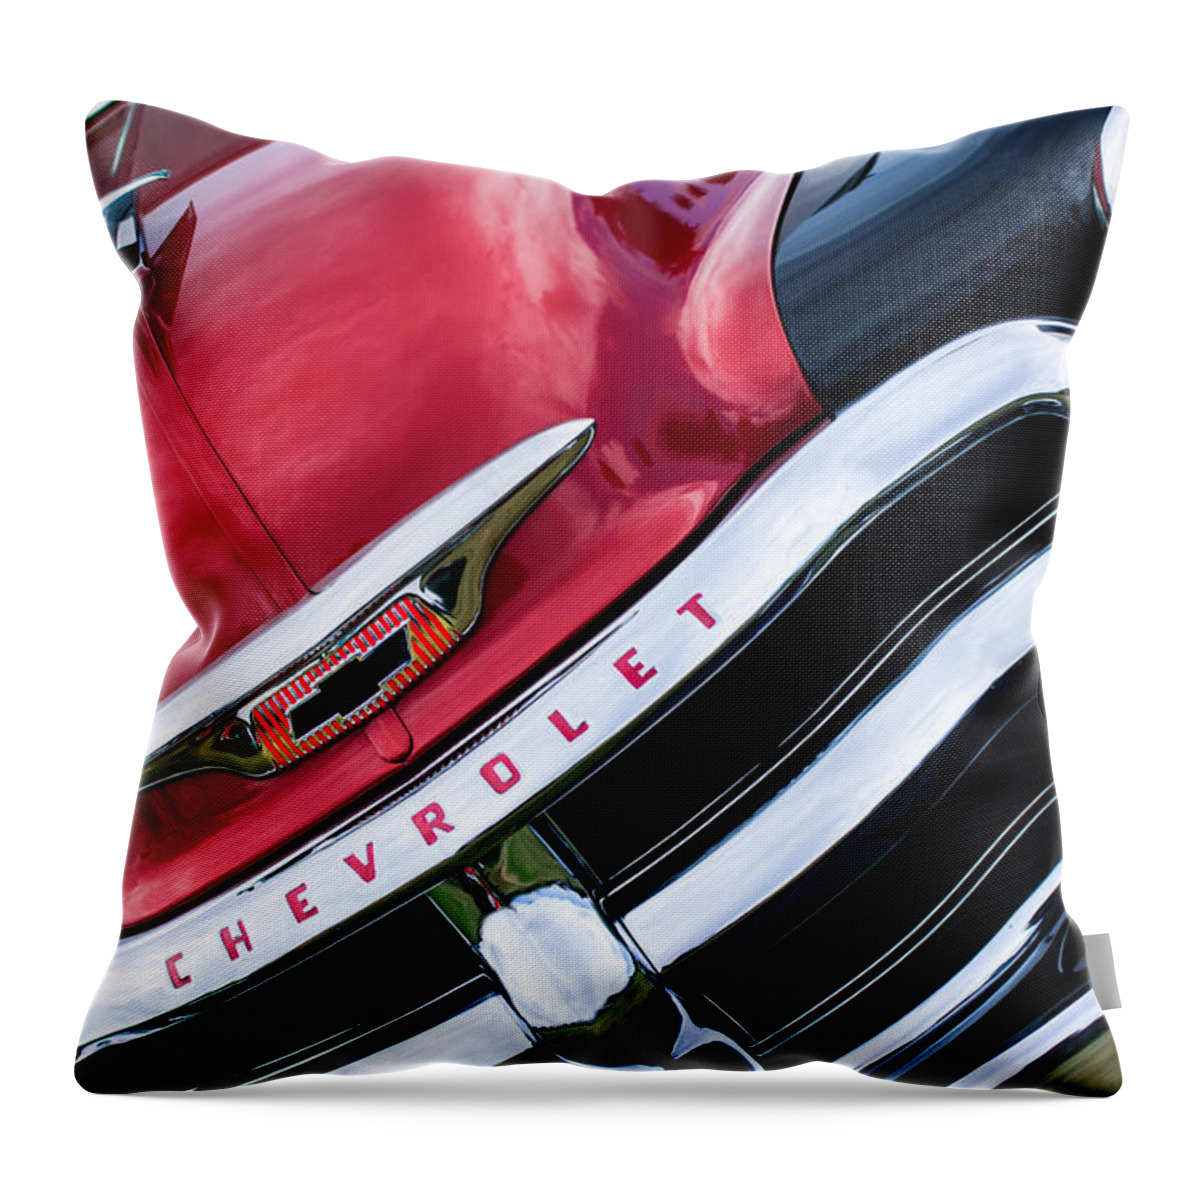 1955 Chevrolet 3100 Pickup Truck Grille Emblem Throw Pillow featuring the photograph 1955 Chevrolet 3100 Pickup Truck Grille Emblem by Jill Reger